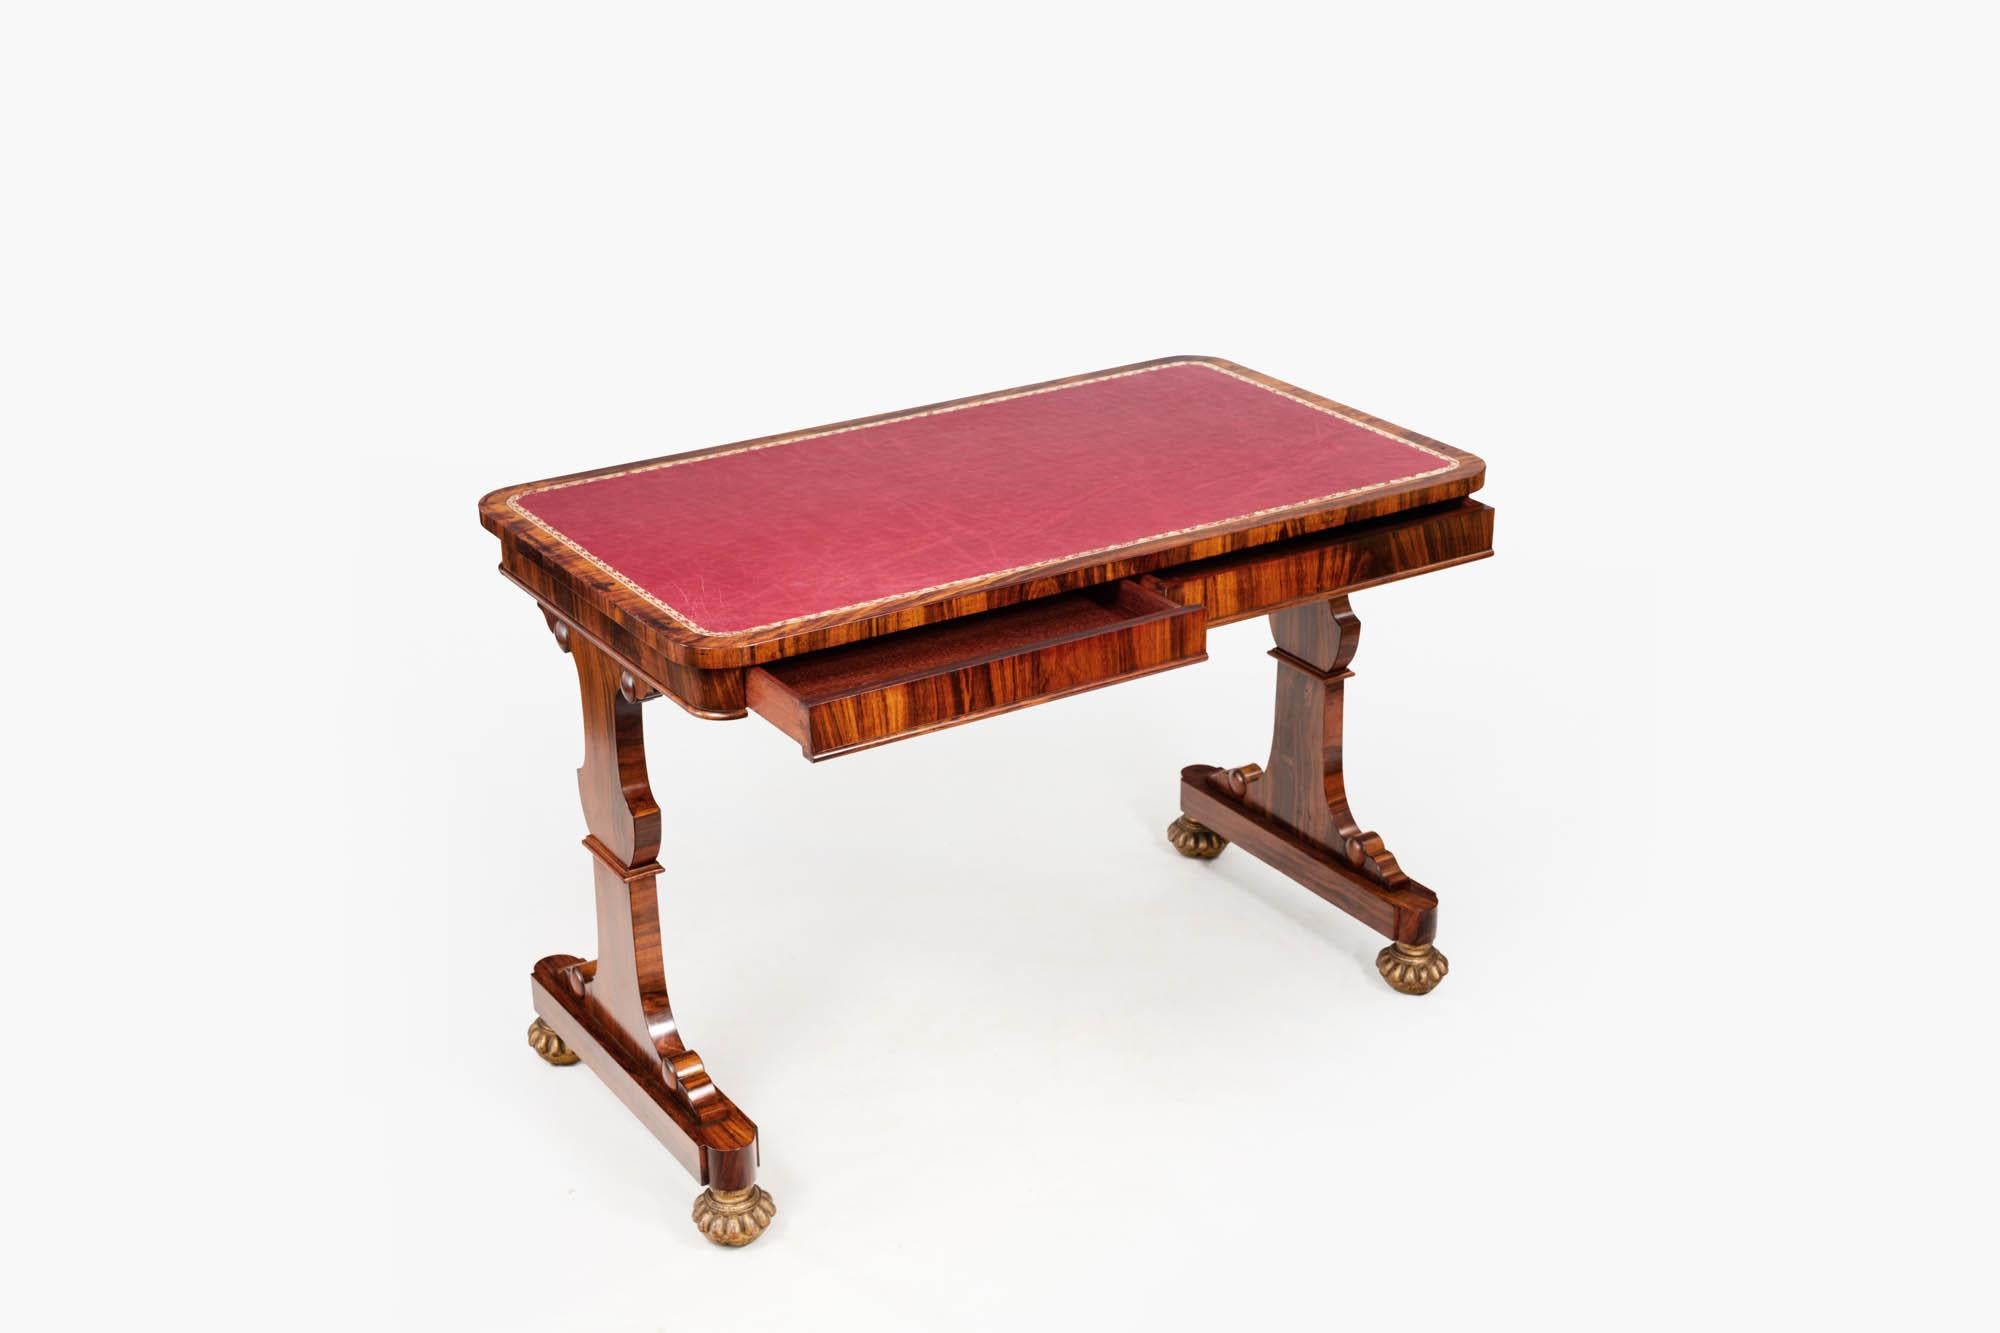 19th century William IV rosewood library table. The rectangular top with rounded corners features a red tooled inset leather writing surface and two disguised drawers. Supported on twin carved uprights, this piece terminates on castors that have